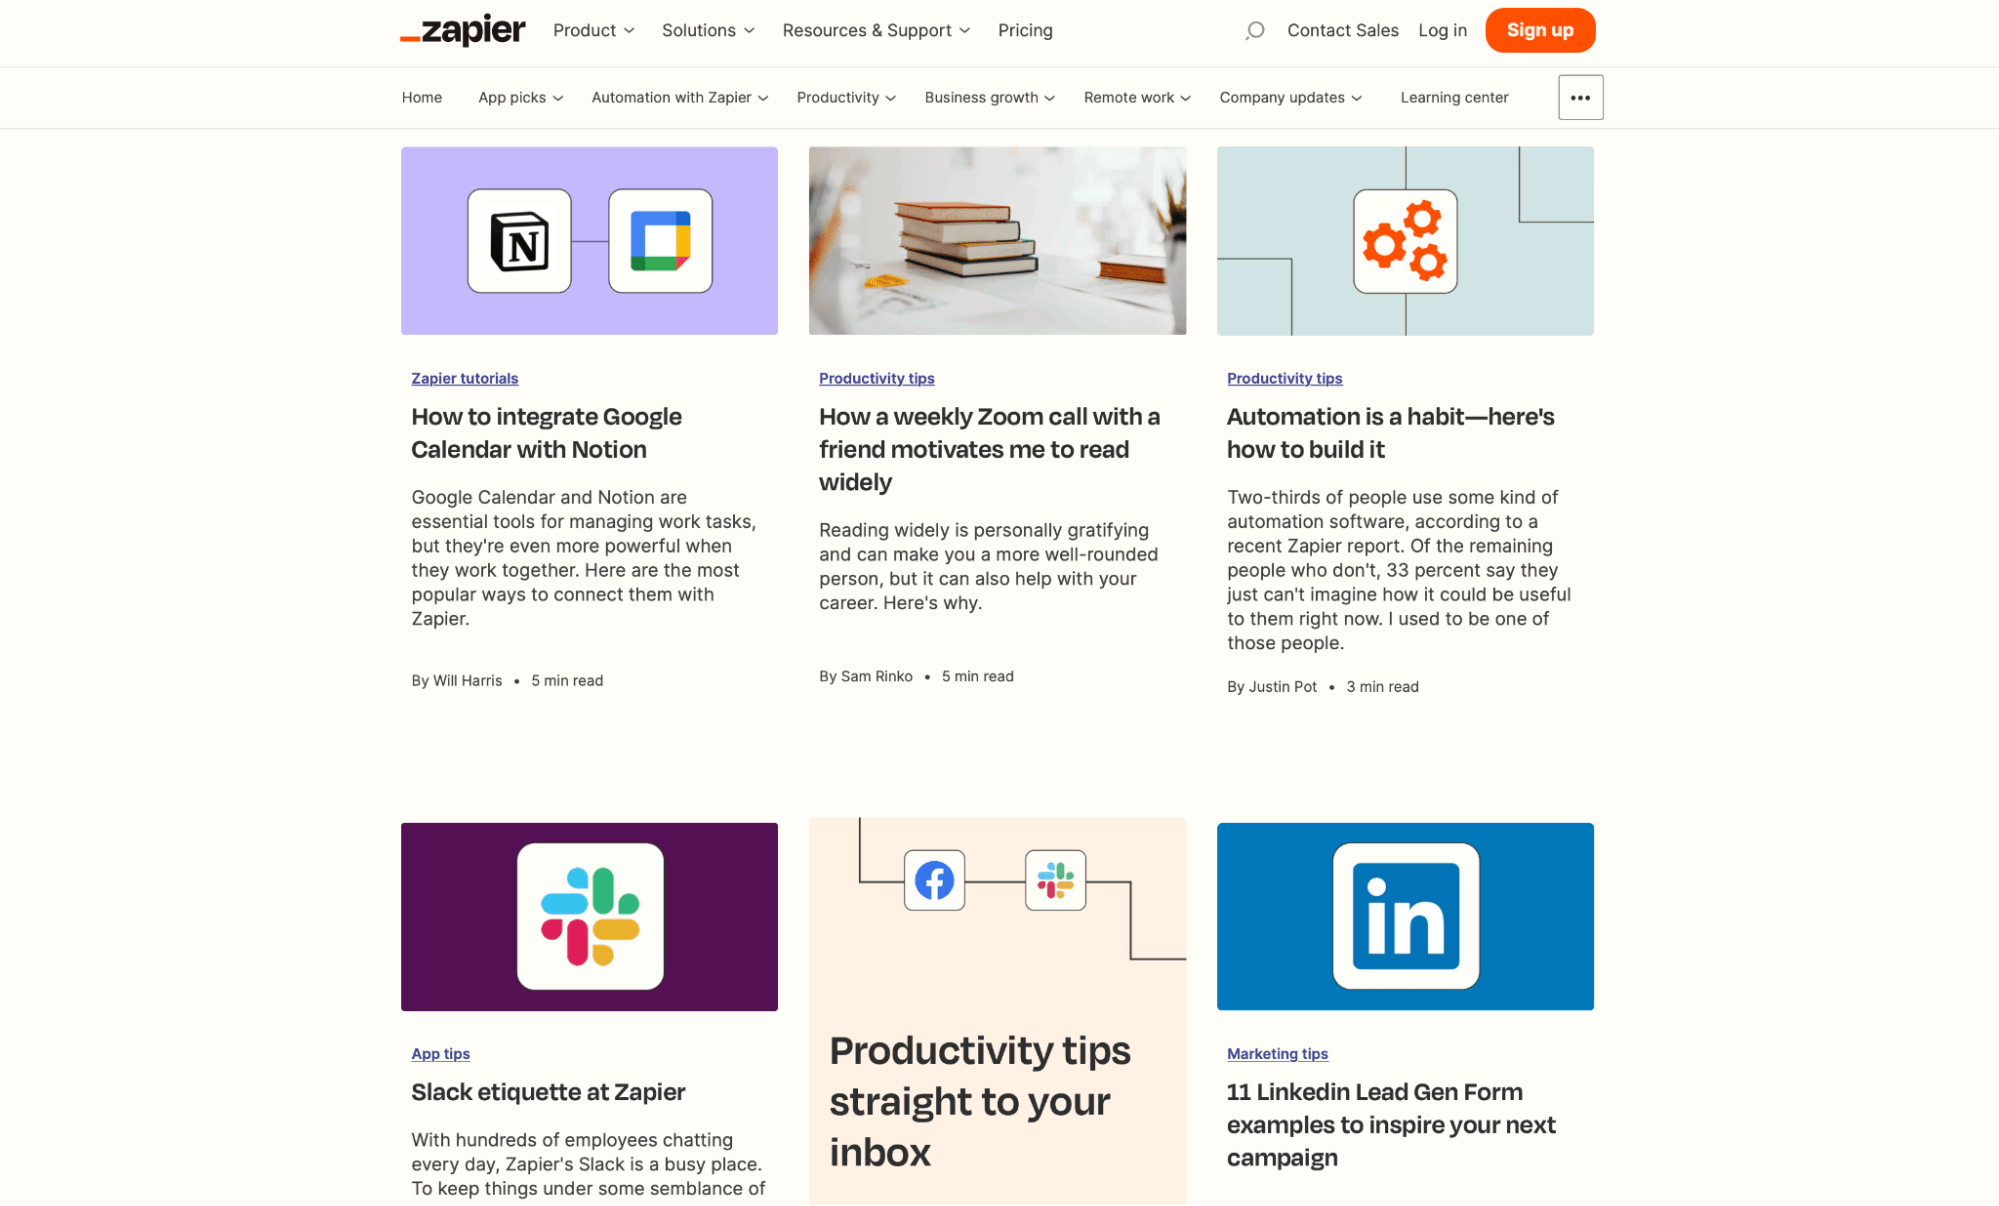 Zapier’s blog today features a mix of tutorials, roundups, and productivity guides